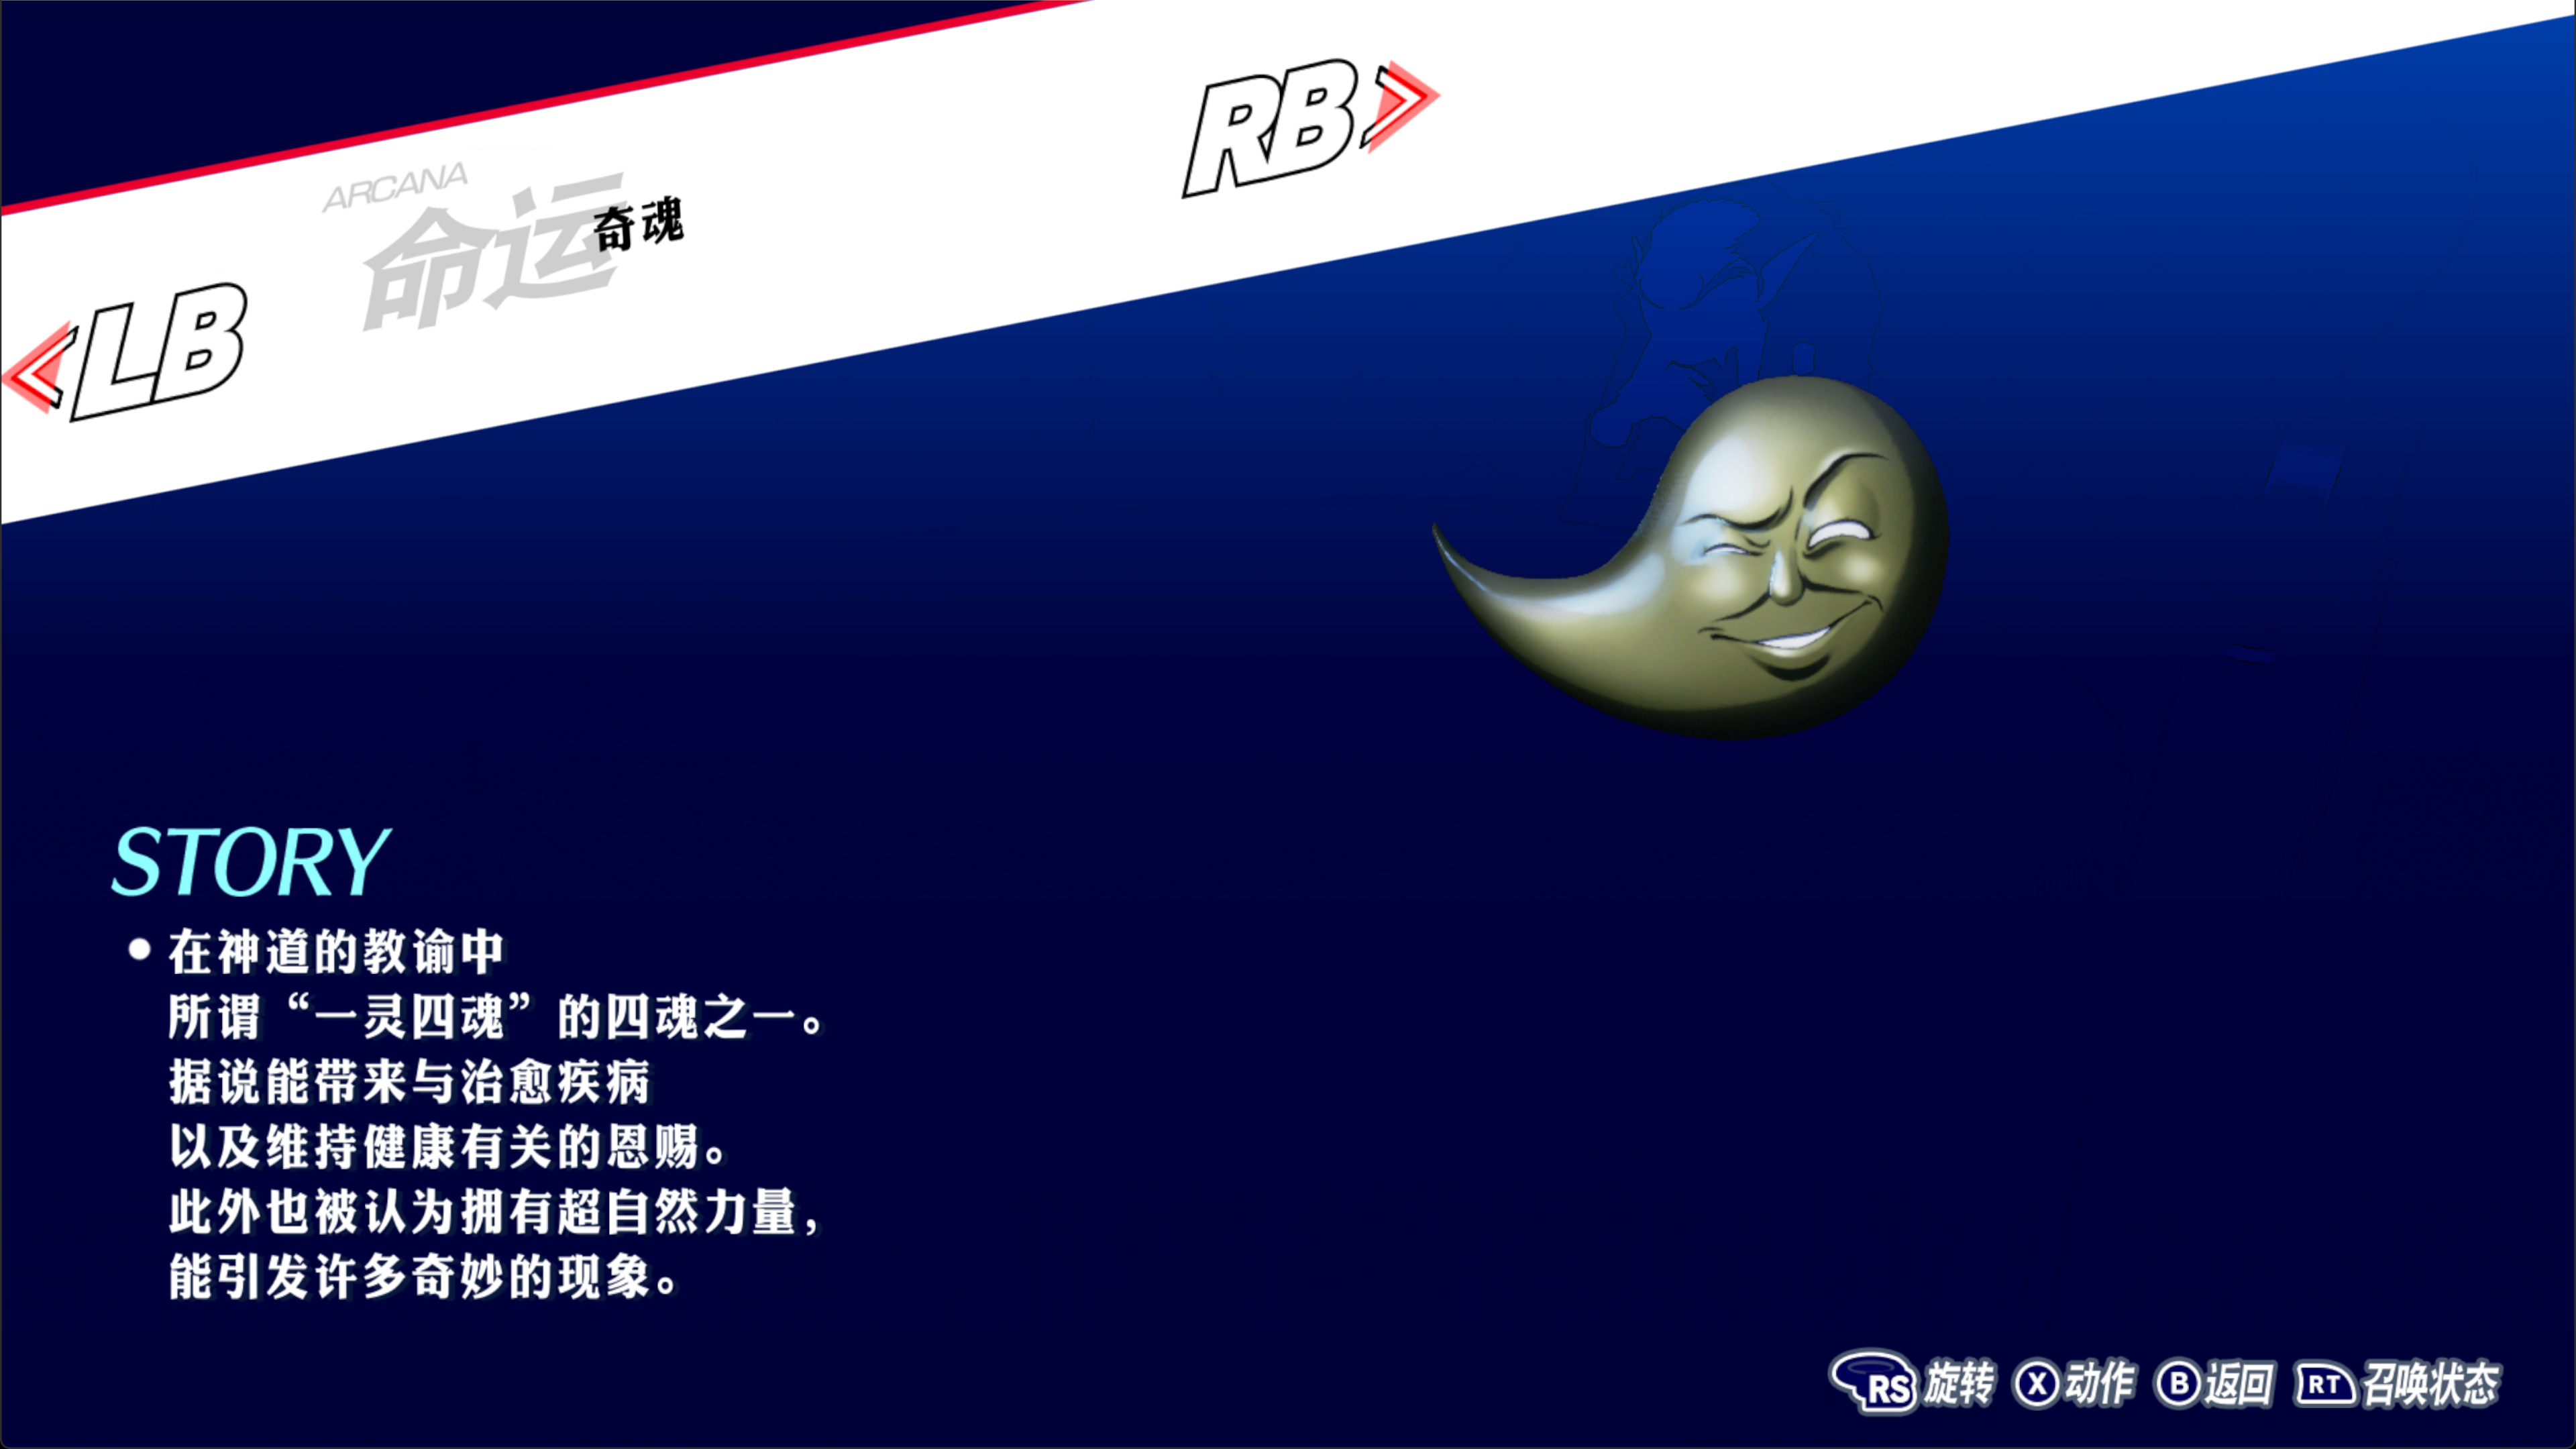 P3R 奇魂图鉴.png